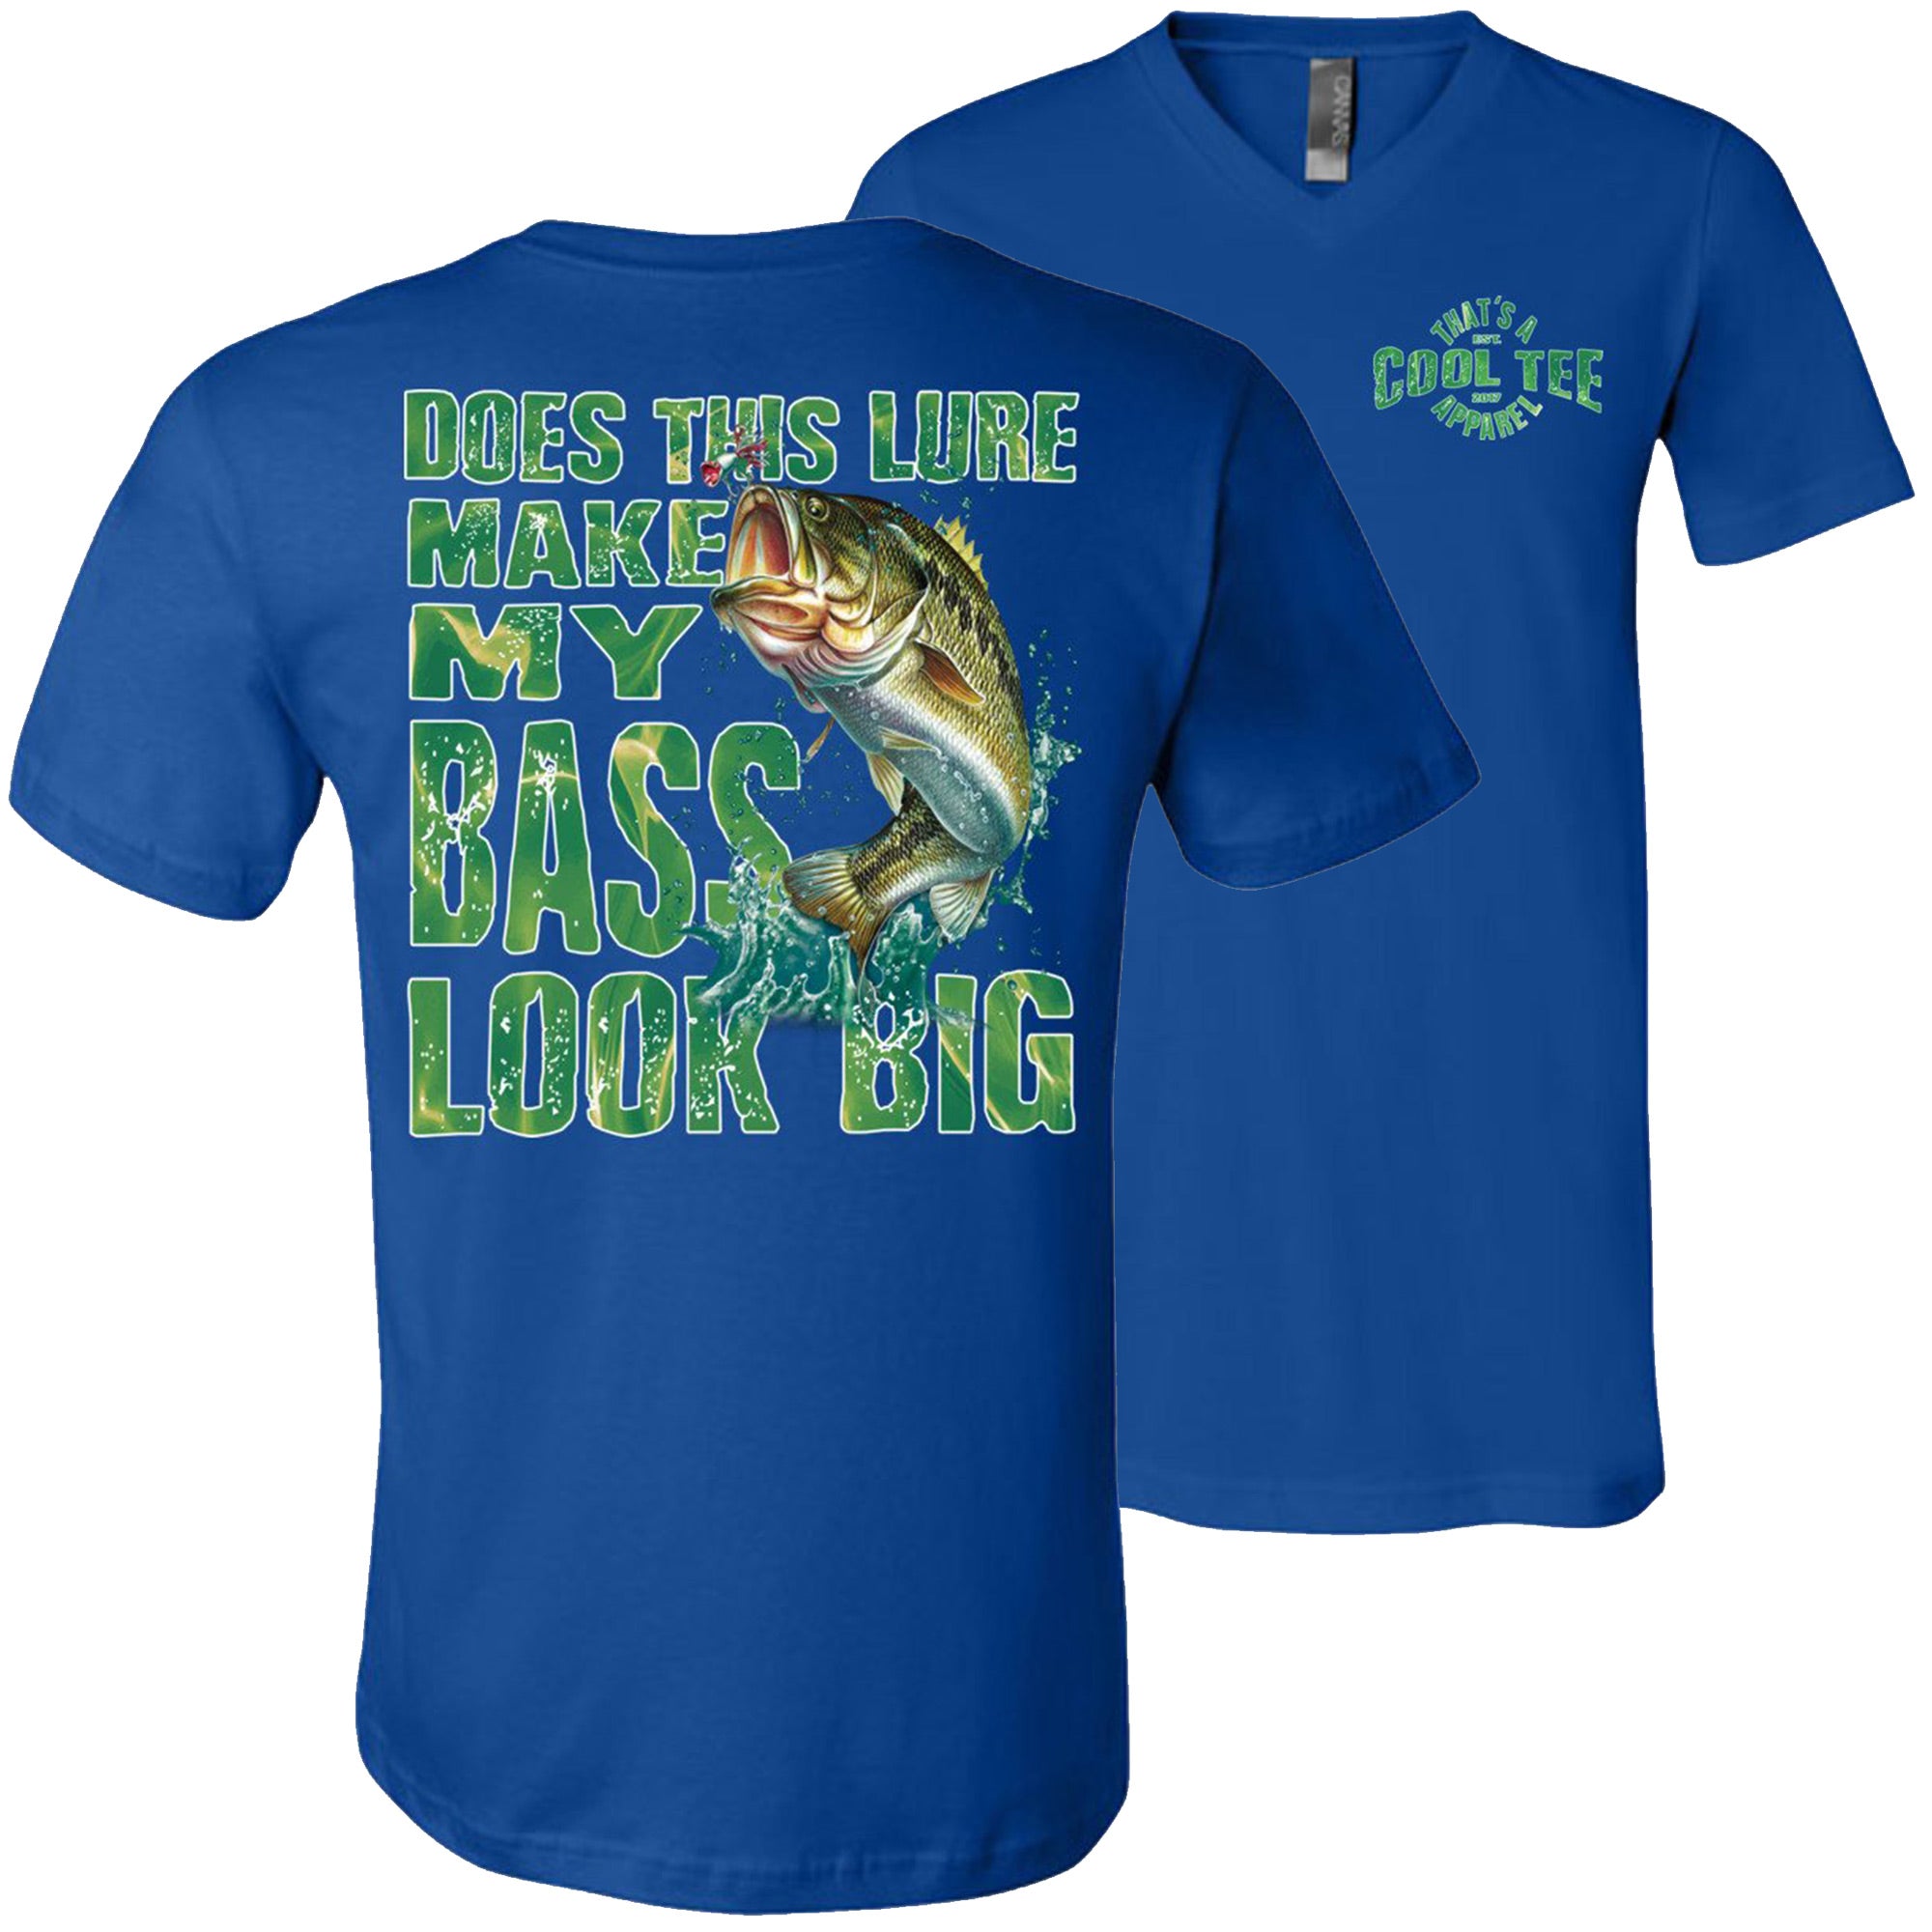 Gone Fishing With Daddy Kids Cotton T-Shirt - Royal - Large